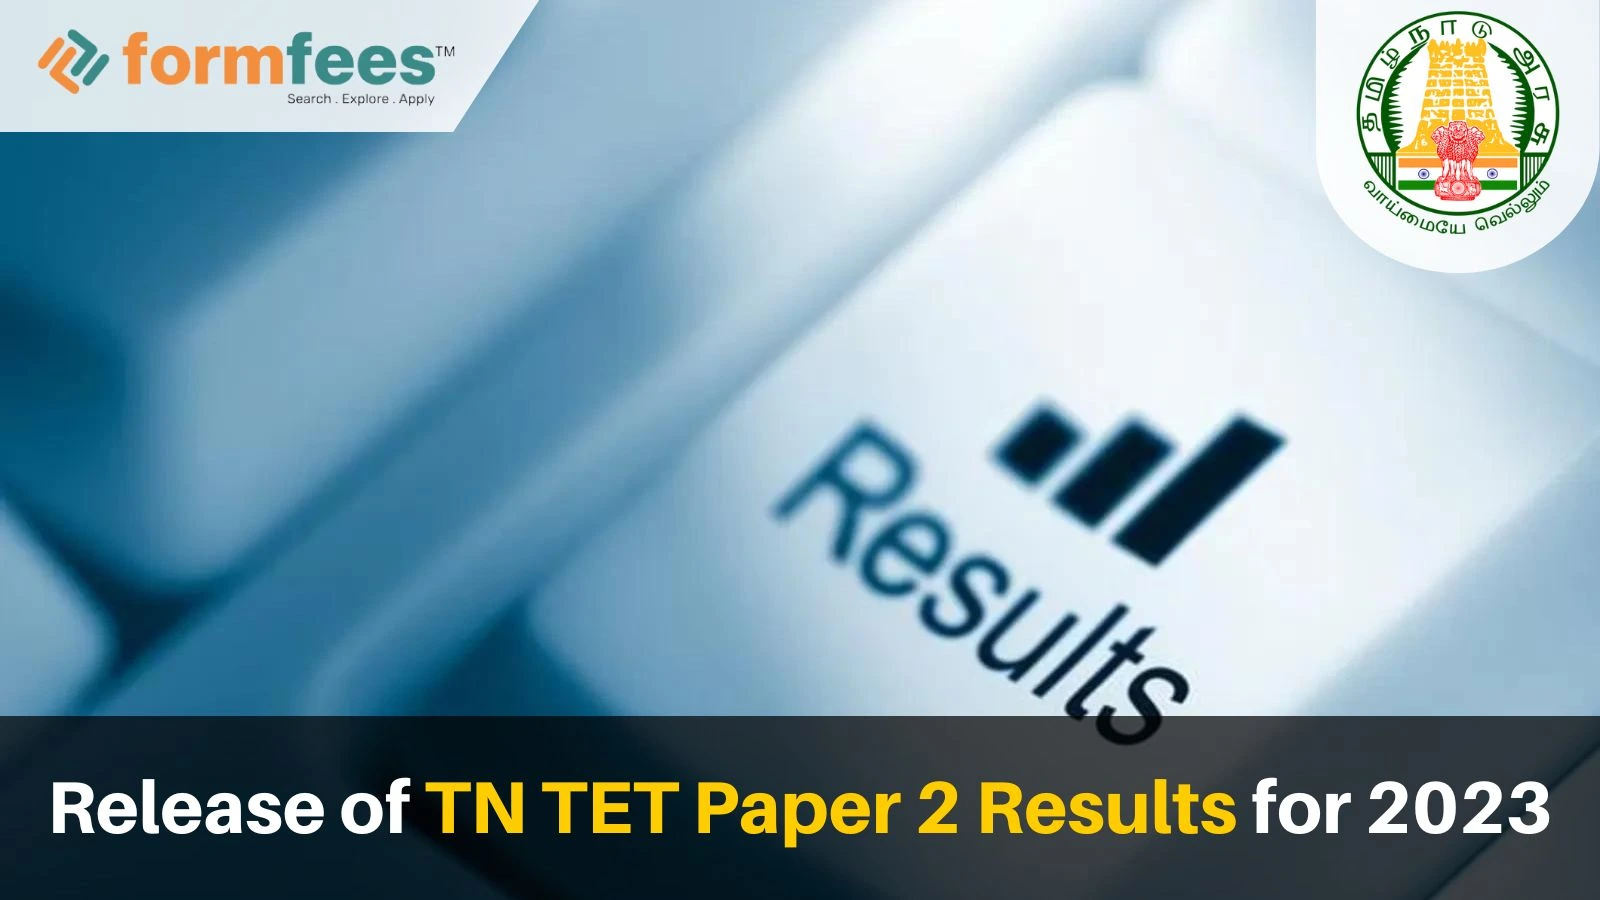 Release of TN TET Paper 2 Results for 2023